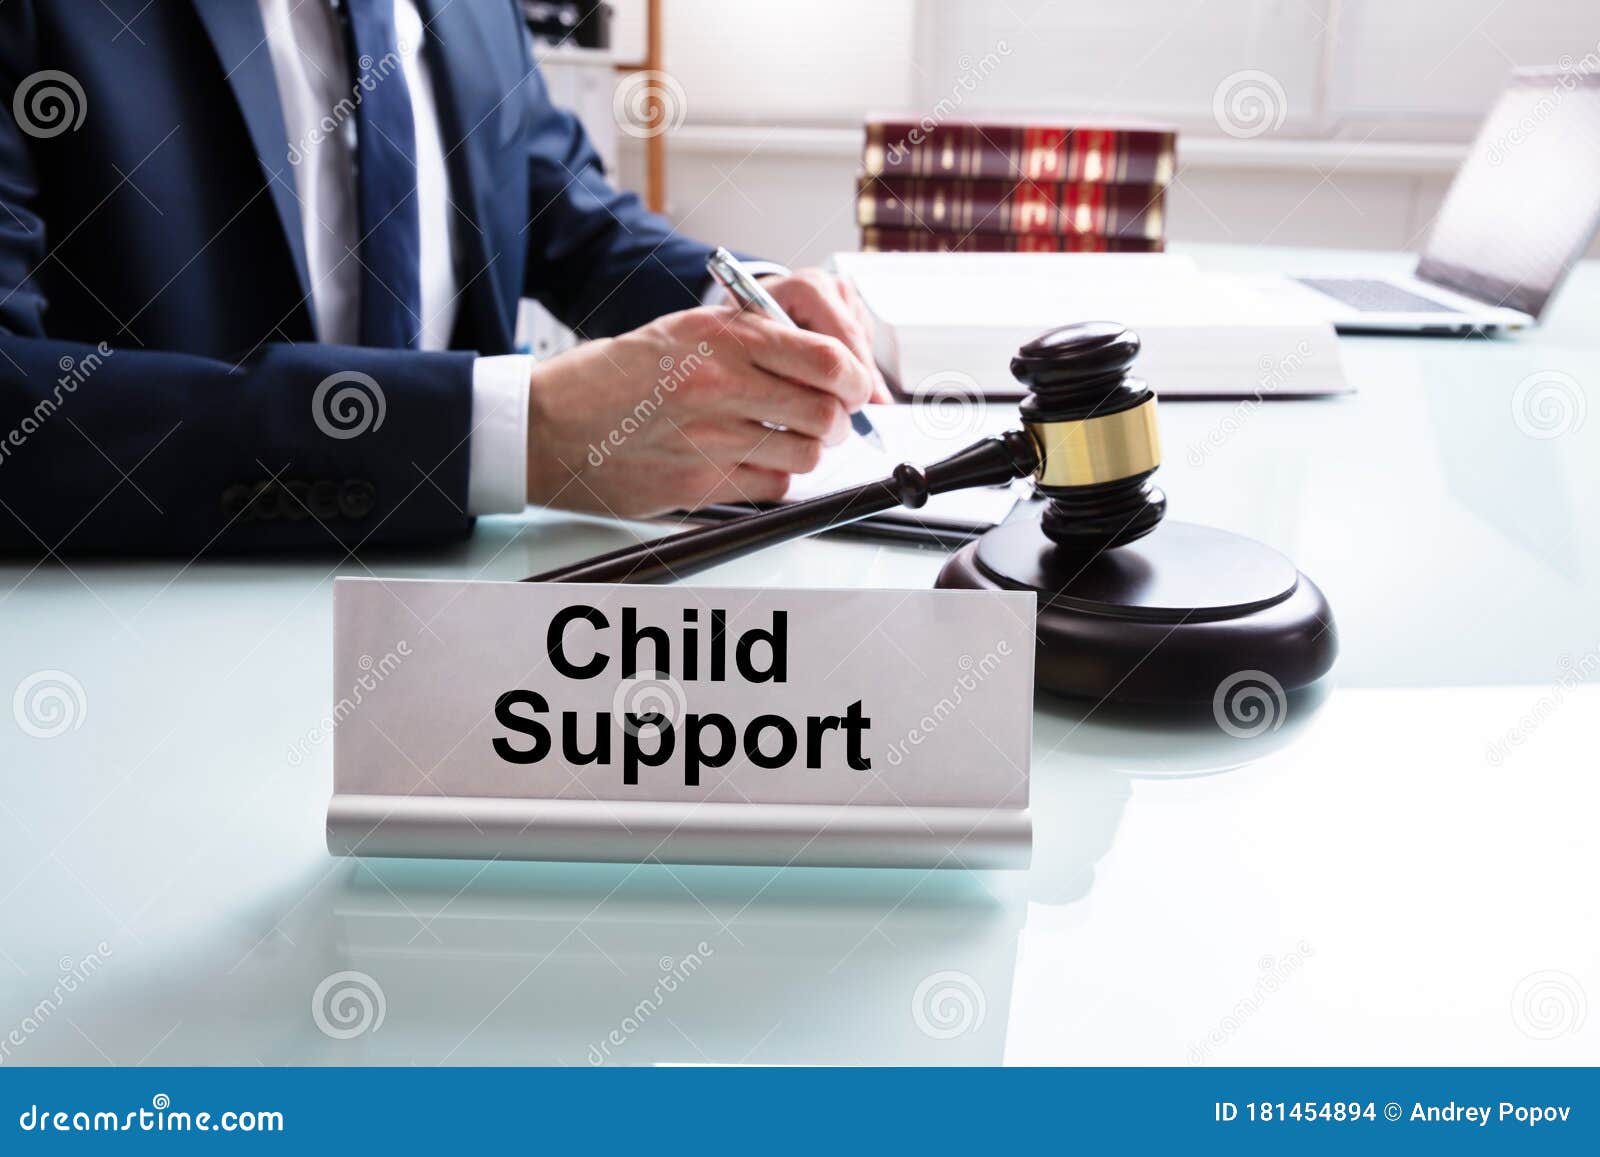 child support nameplate with lawyer and mallet